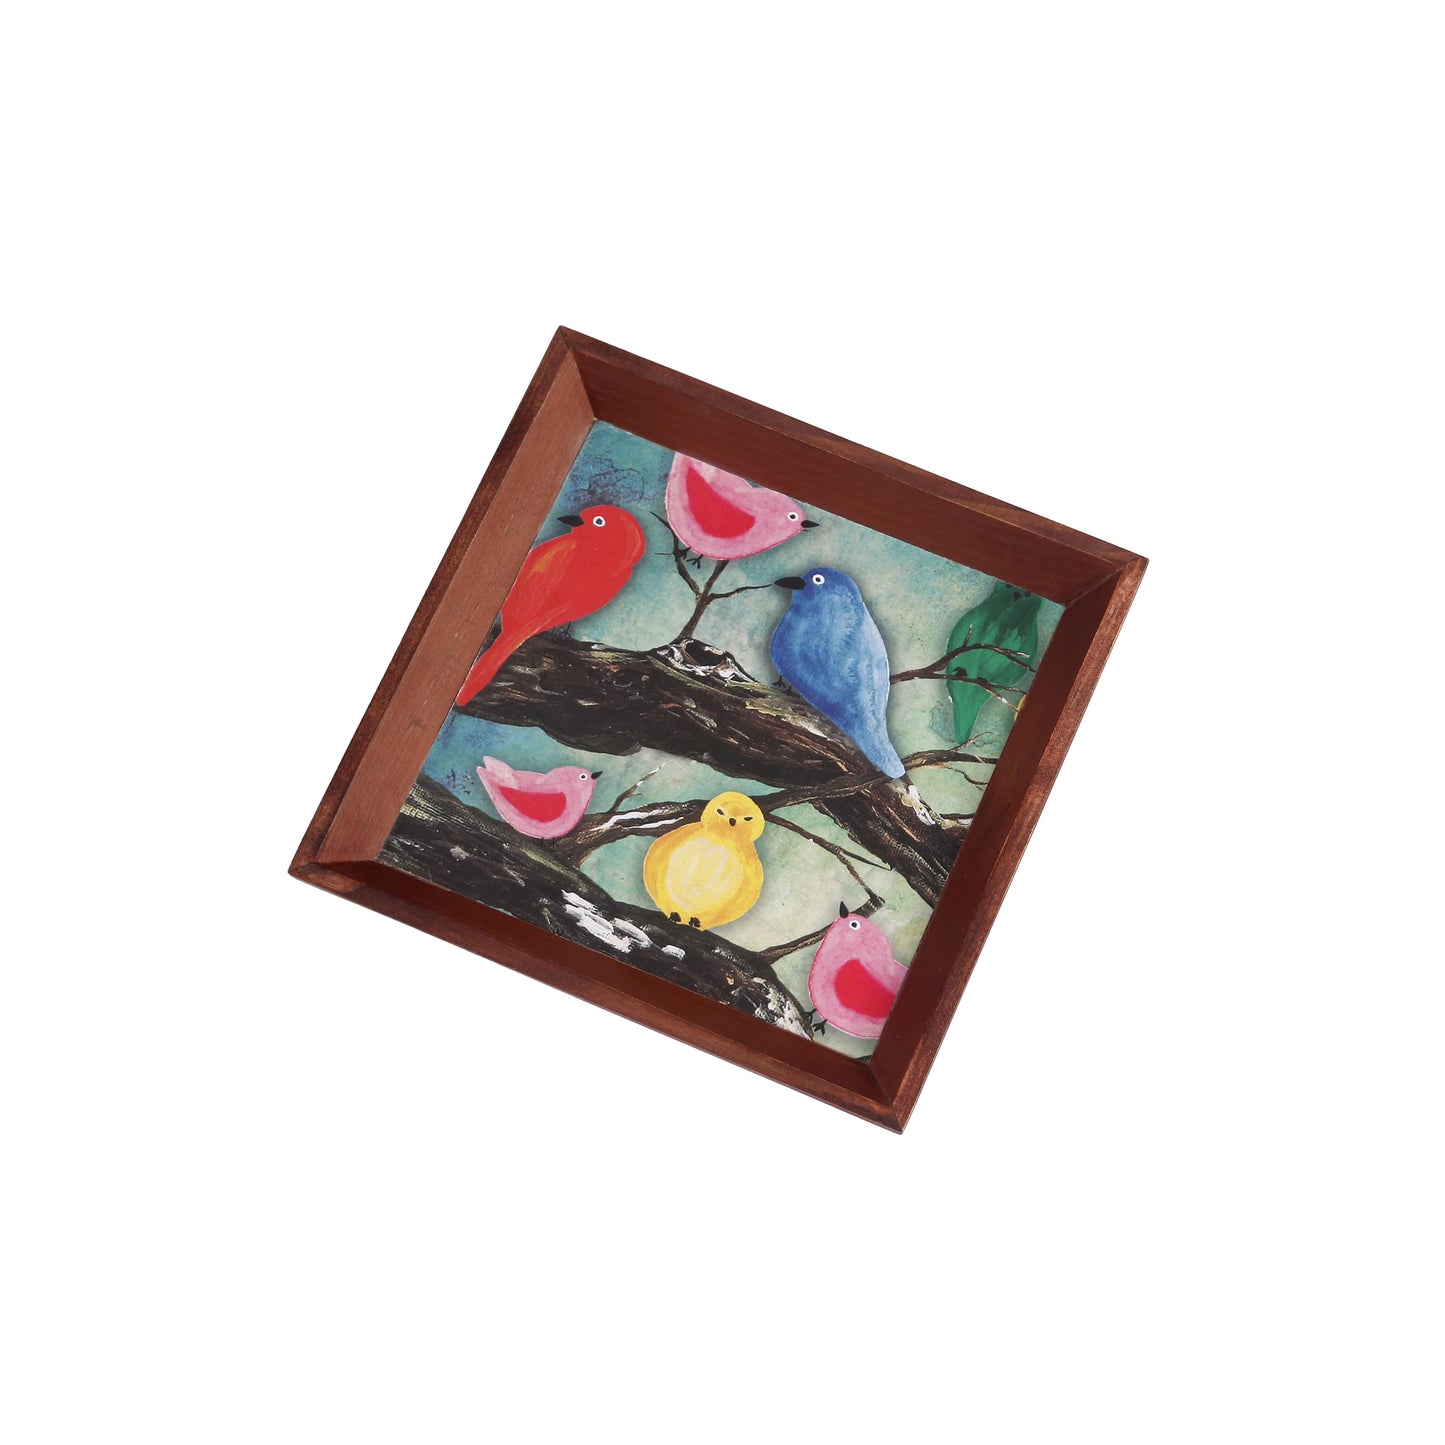 A Tiny Mistake Birds on a Branch Small Square Wooden Serving Tray, 18 x 18 x 2 cm